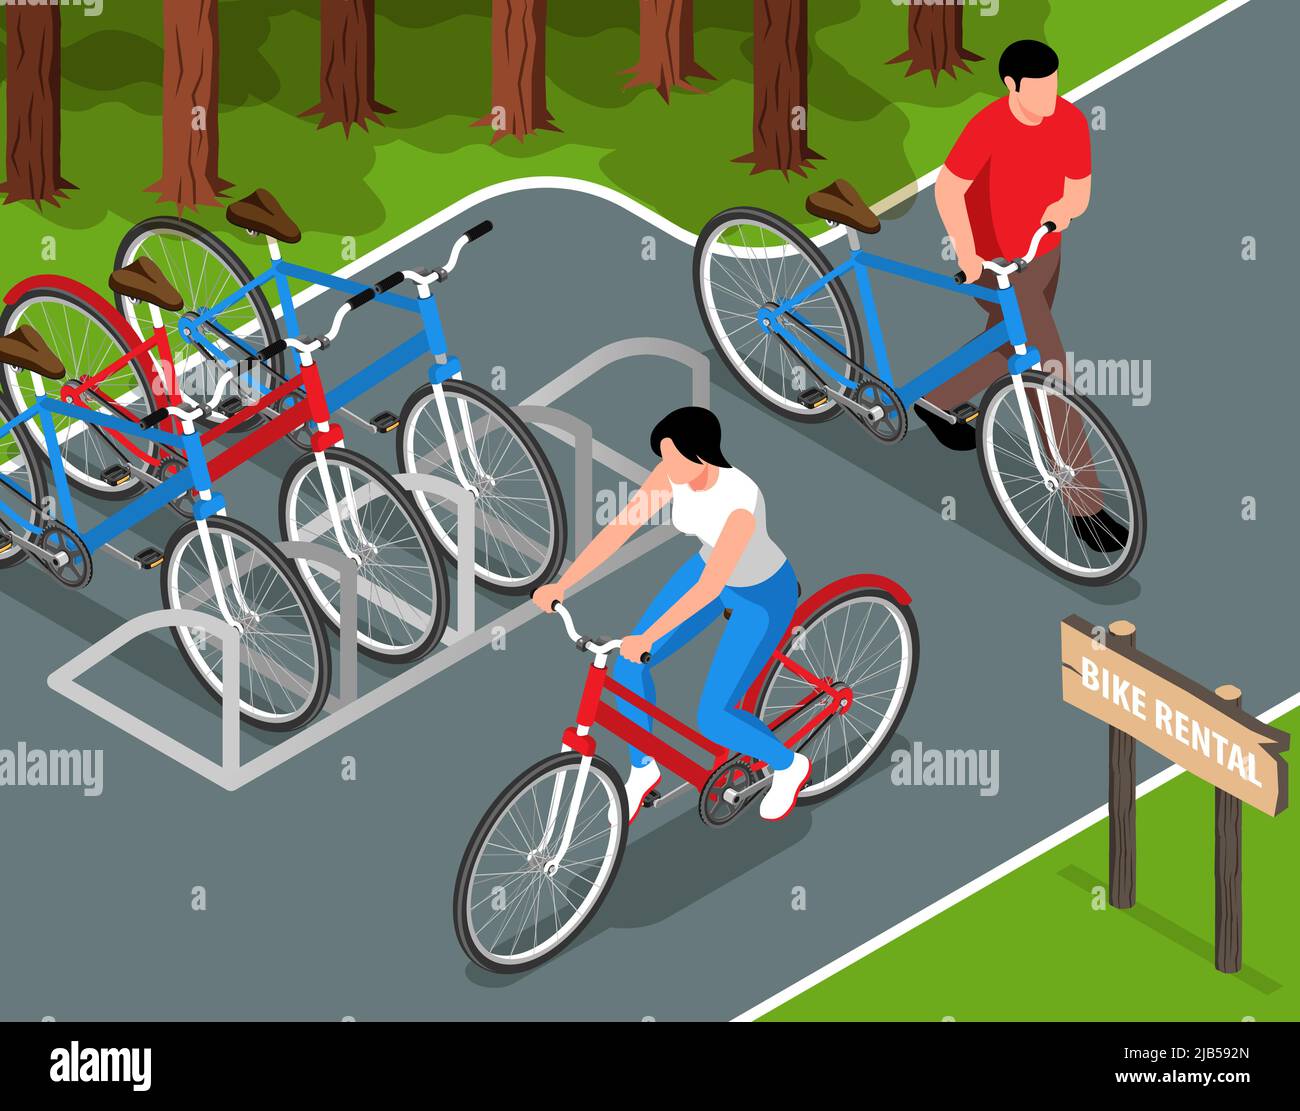 Bike rental isometric vector illustration with some bicycles on city ...